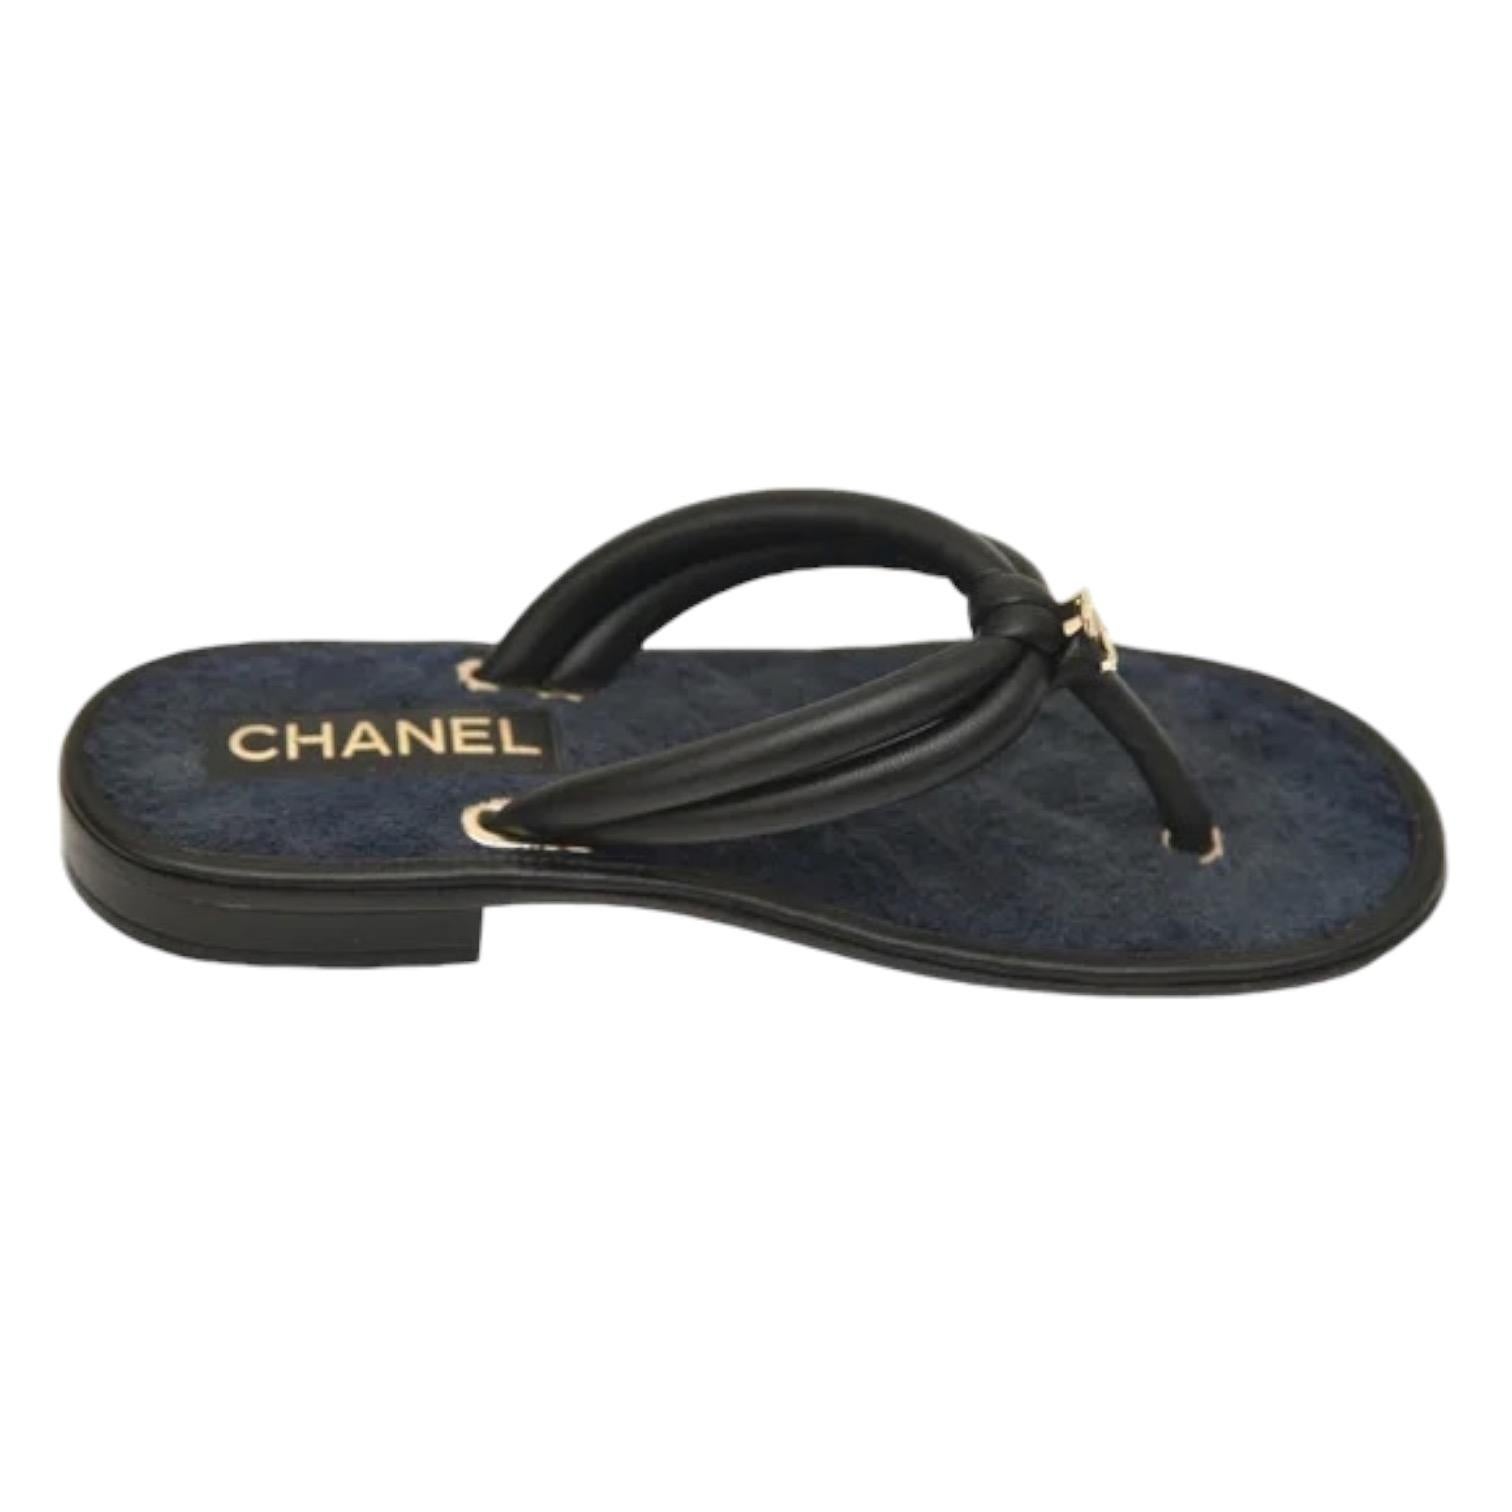 GUARANTEED AUTHENTIC 2021 BLACK LEATHER NAVY FABRIC THONG SANDALS


Design:
- Leather and fabric uppers.
- CC logo in gold at top.
- Thong style lip on.
- Fabric insole, leather outsole.
- Comes with dust bags.

Size: 38C

Measurements